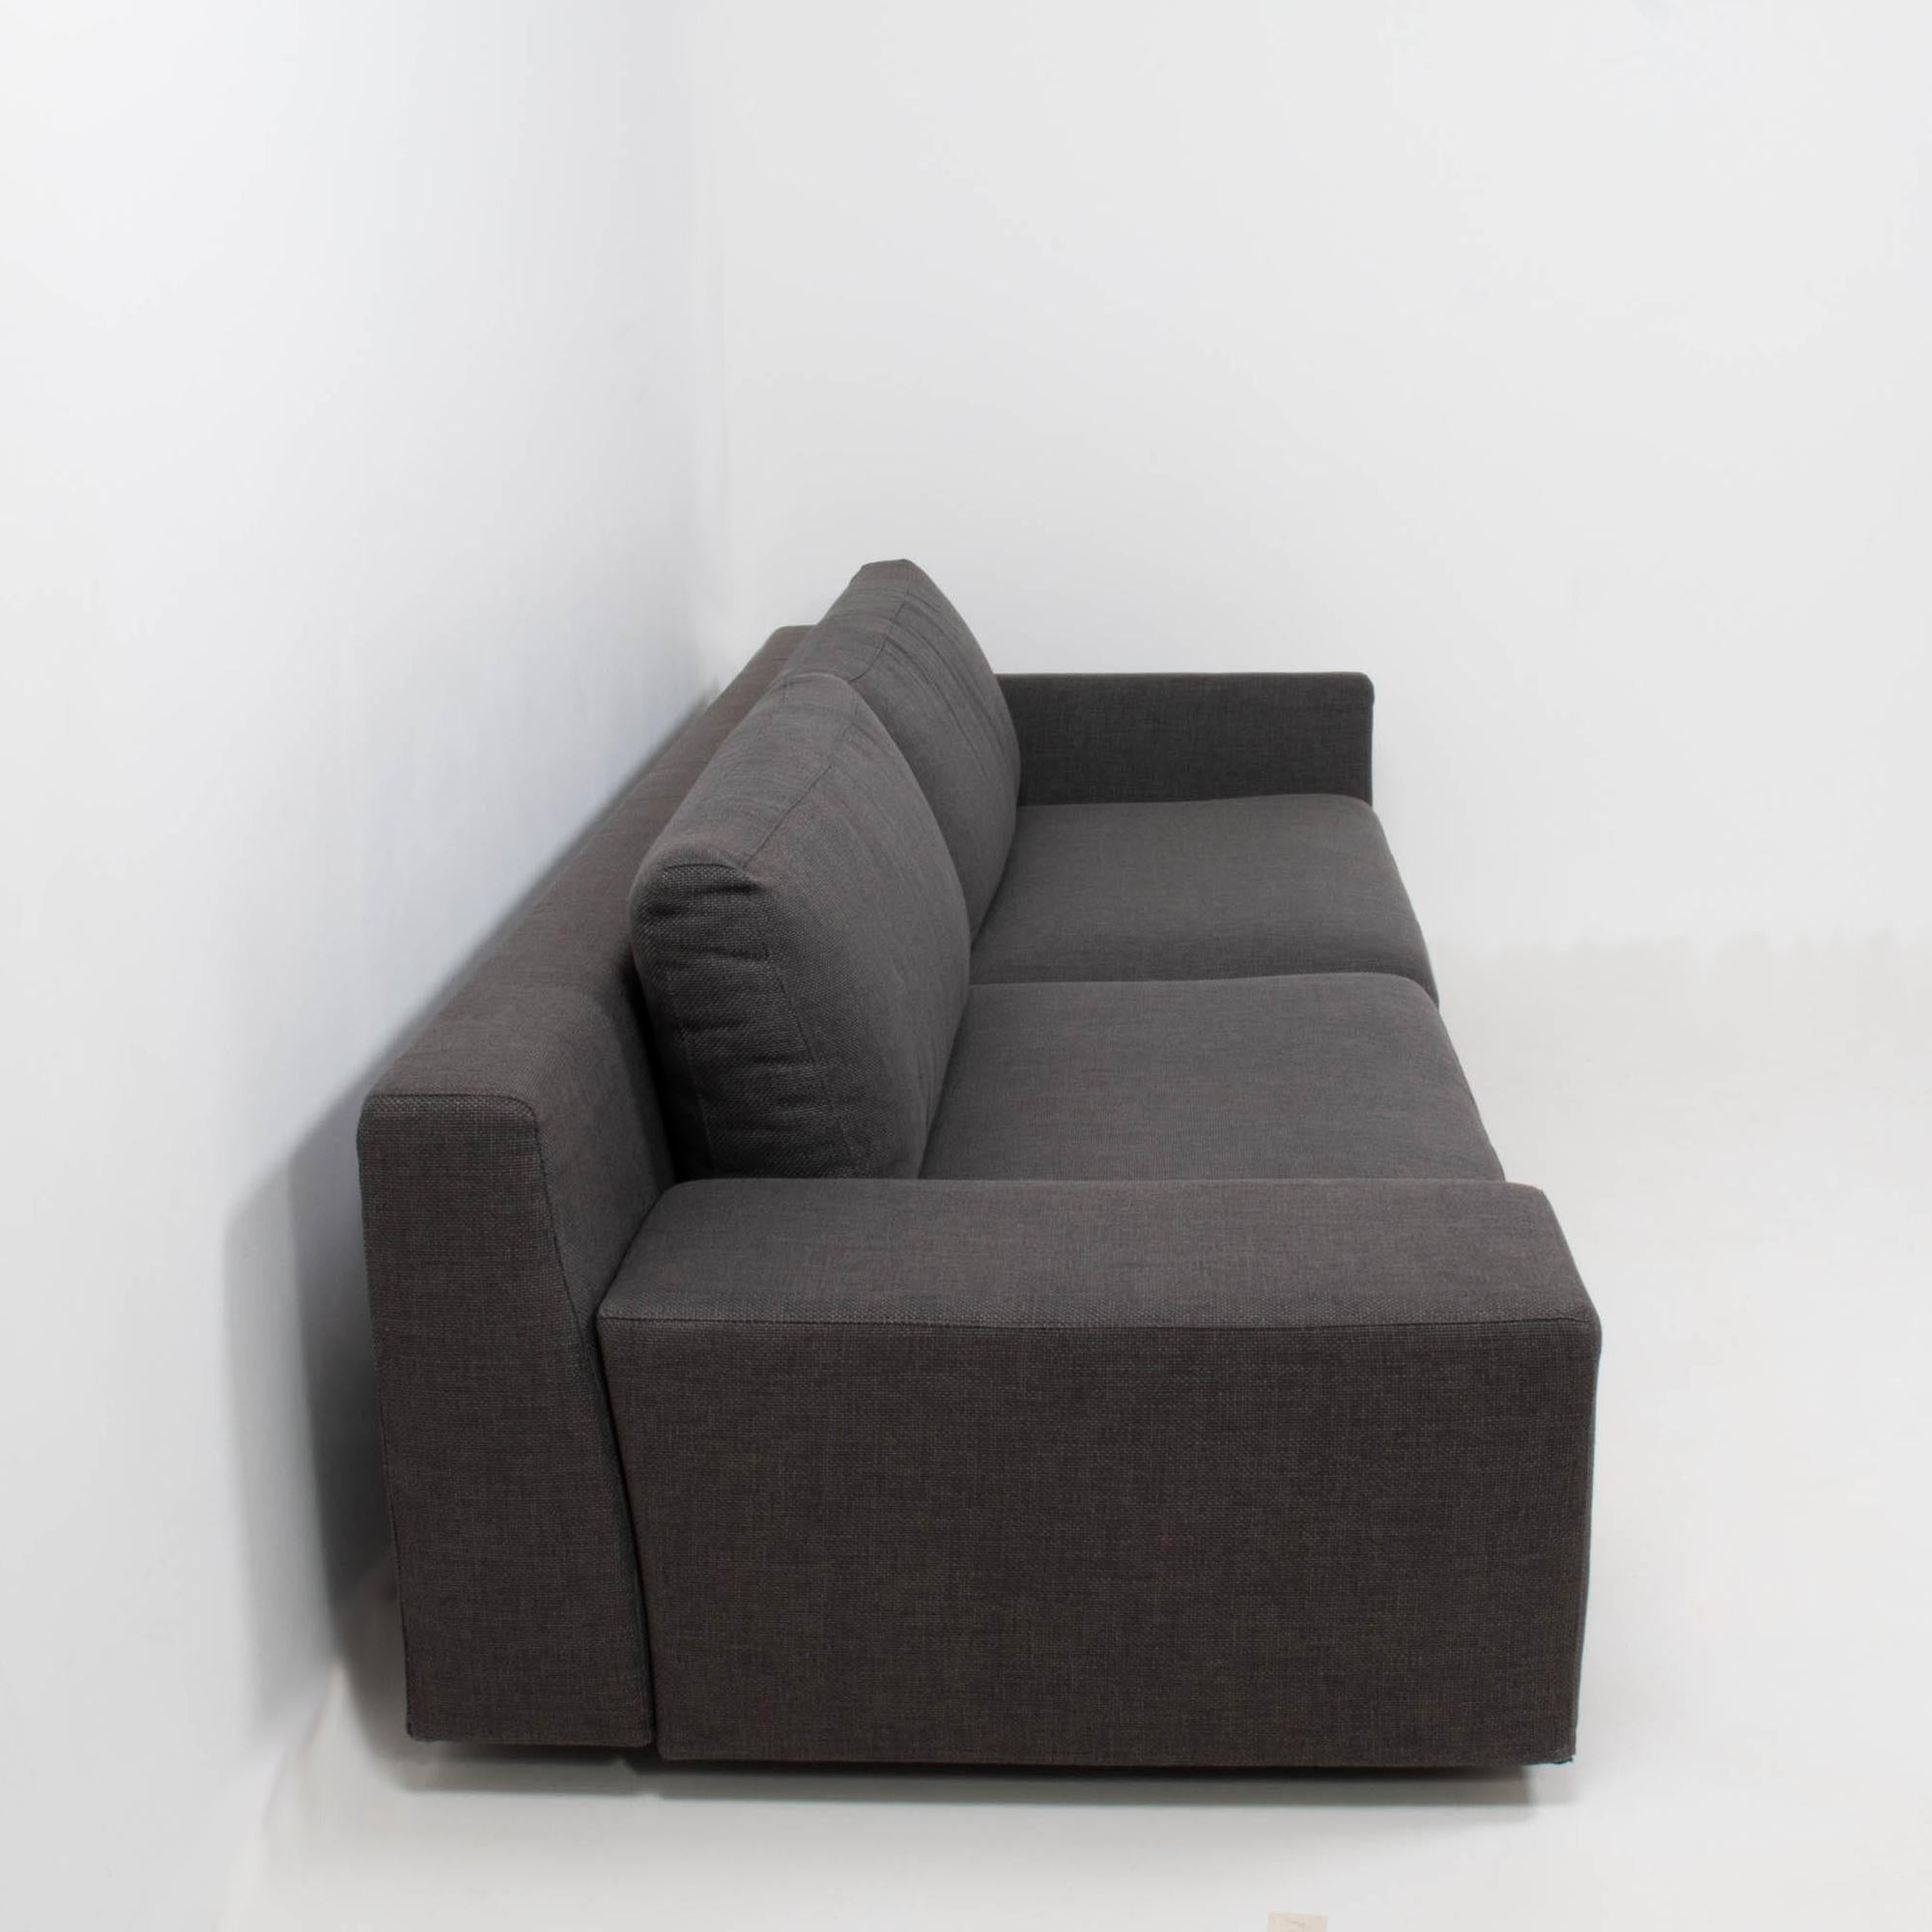 A fantastic example of contemporary design, this Mister sofa is designed by Philippe Starck for Cassina.

The sofa has a low back and deep seating, fully upholstered in dark grey woven fabric.

The sofa has an asymmetric silhouette, with one